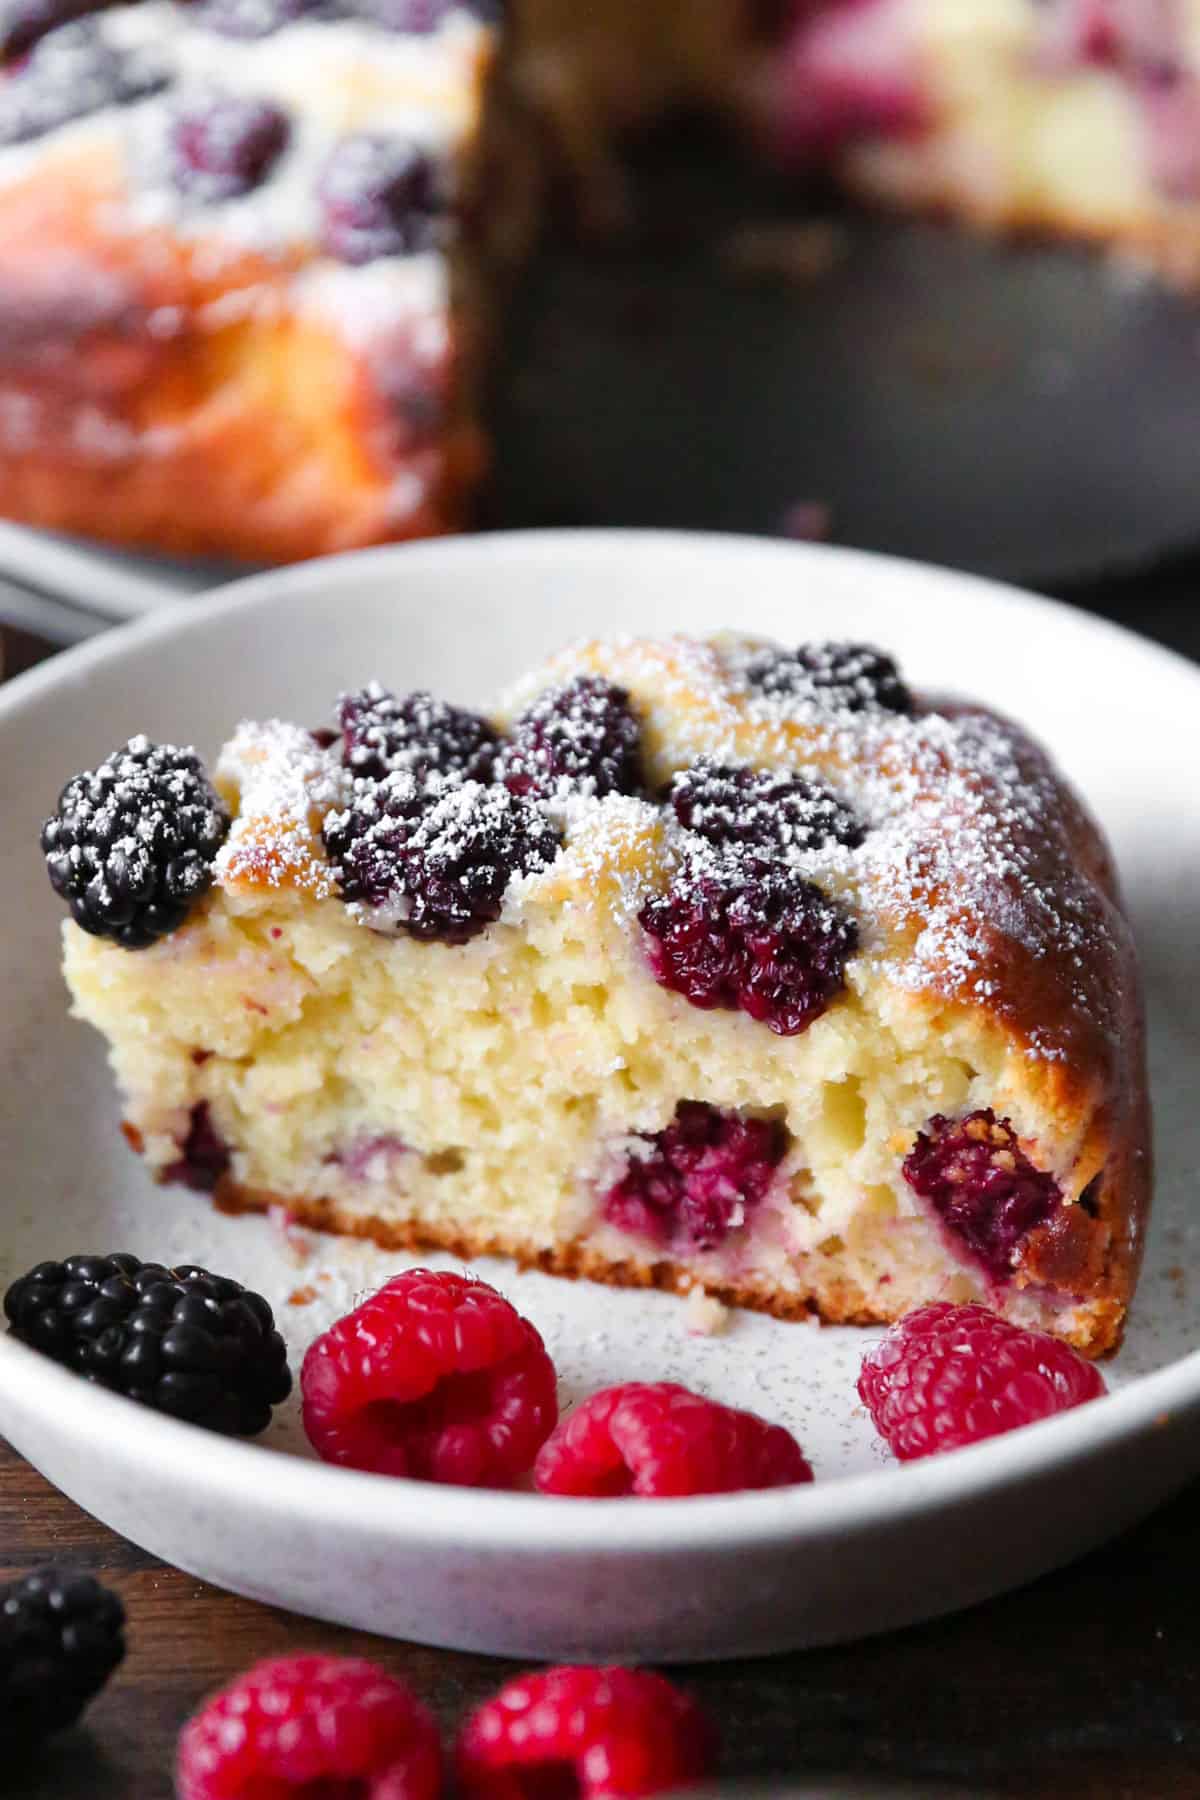 a sliced of blackberry cake on a plate.